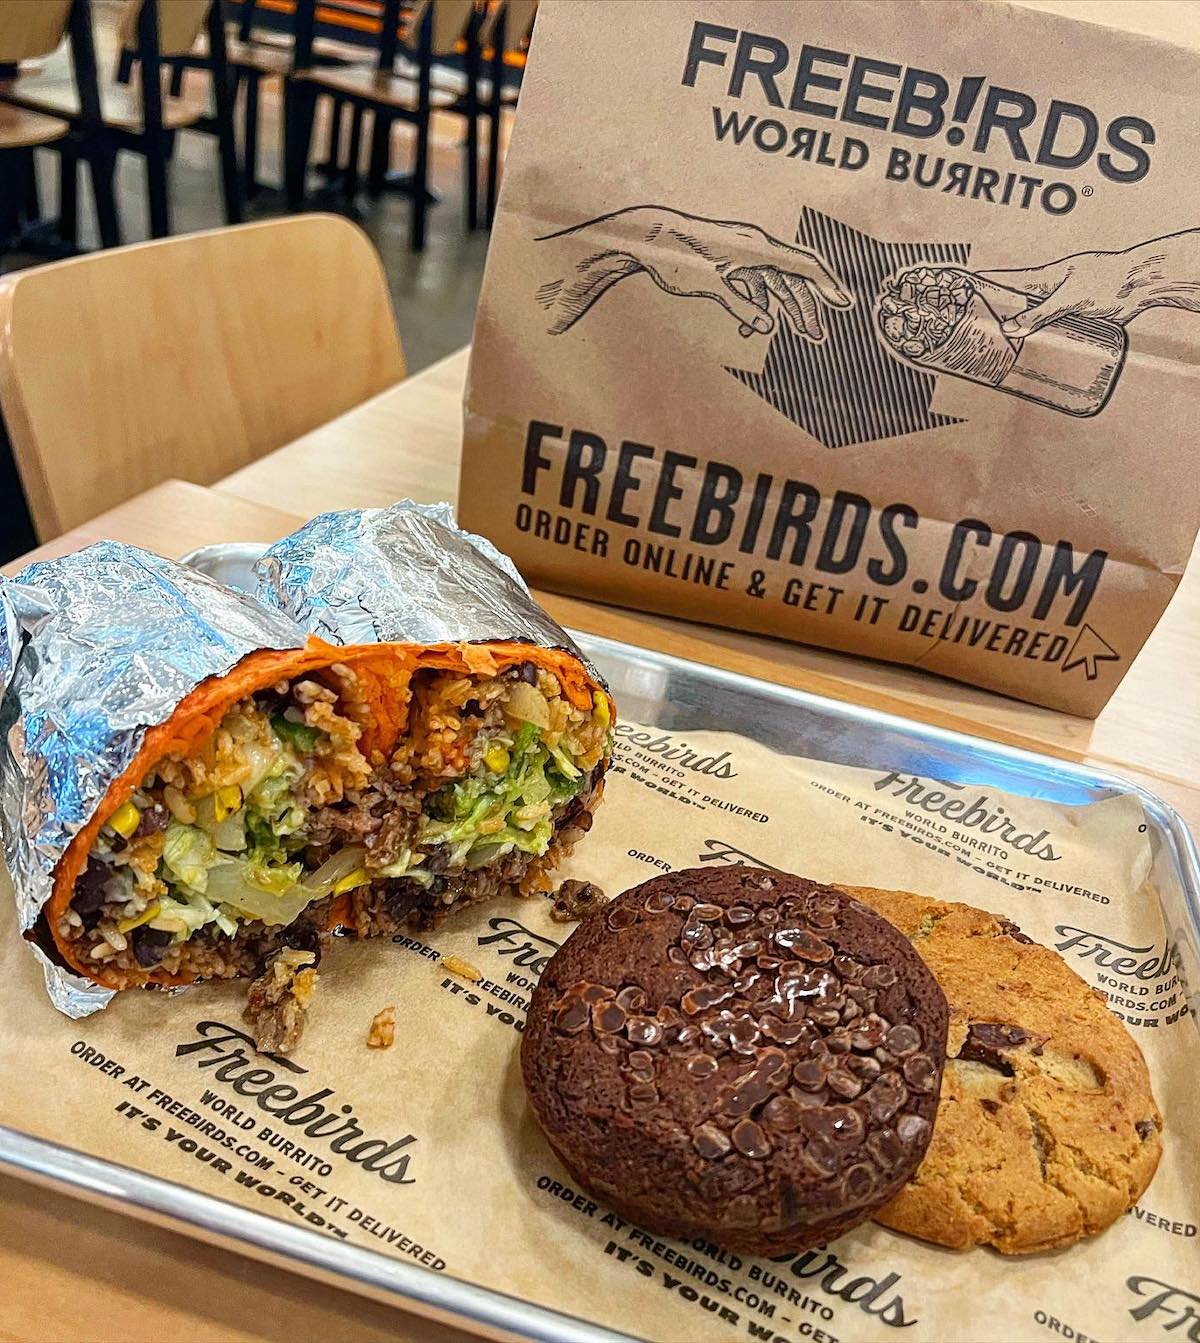 Freebirds World Burrito Continues Its Expansion What Now Houston